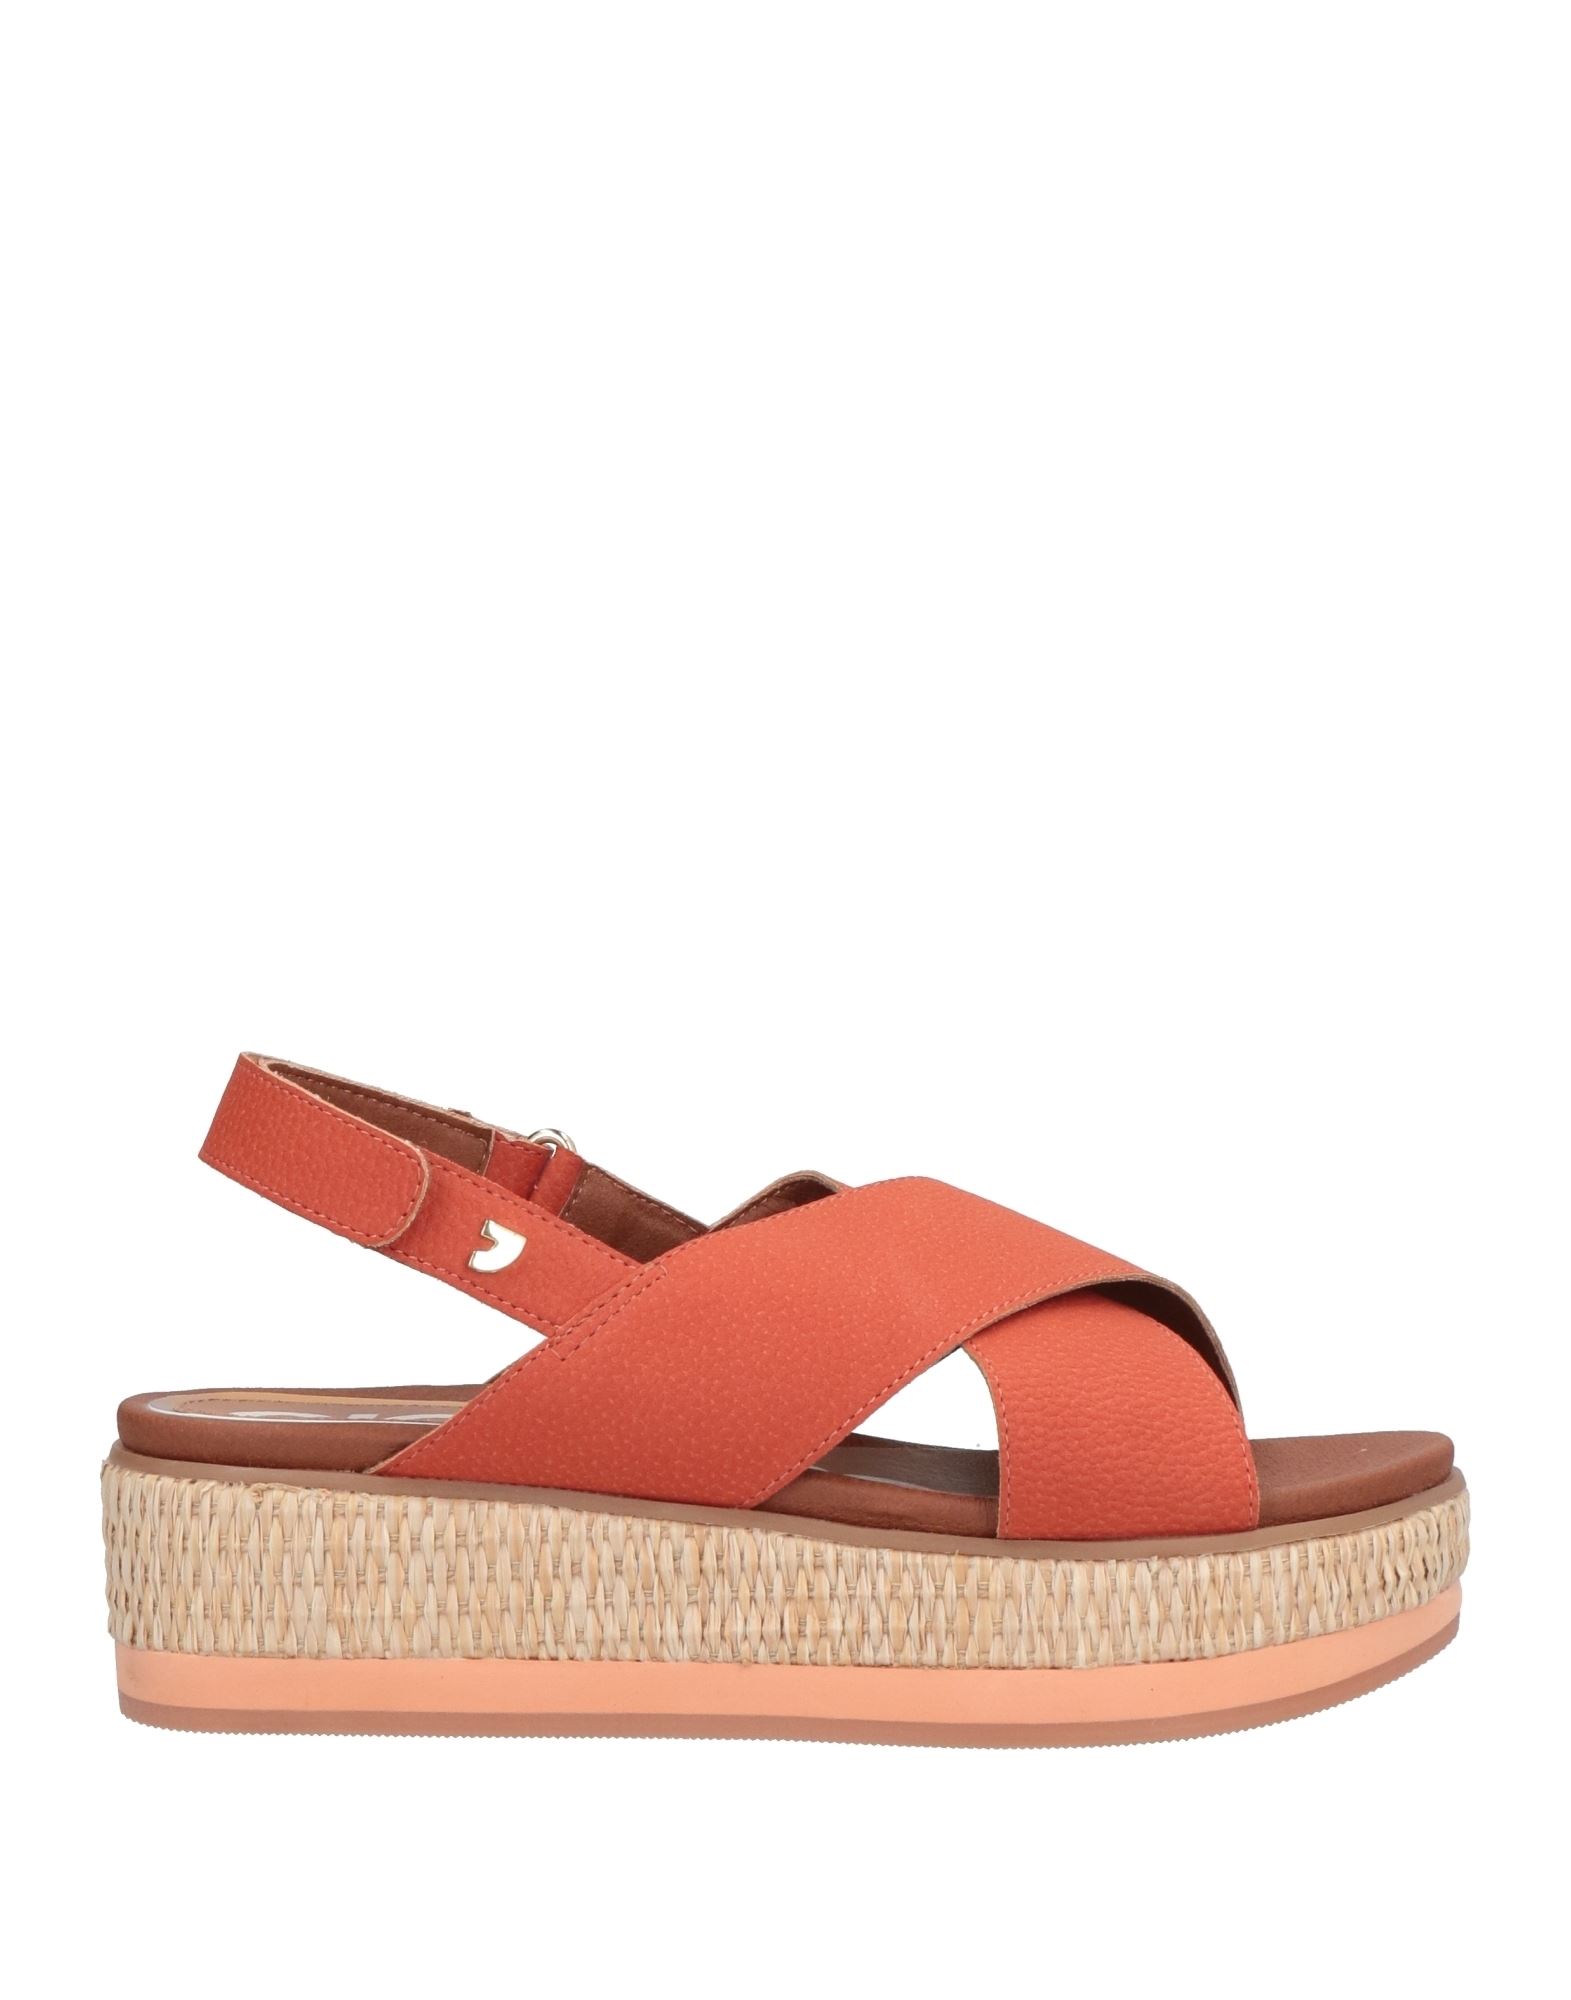 Gioseppo Sandals In Red